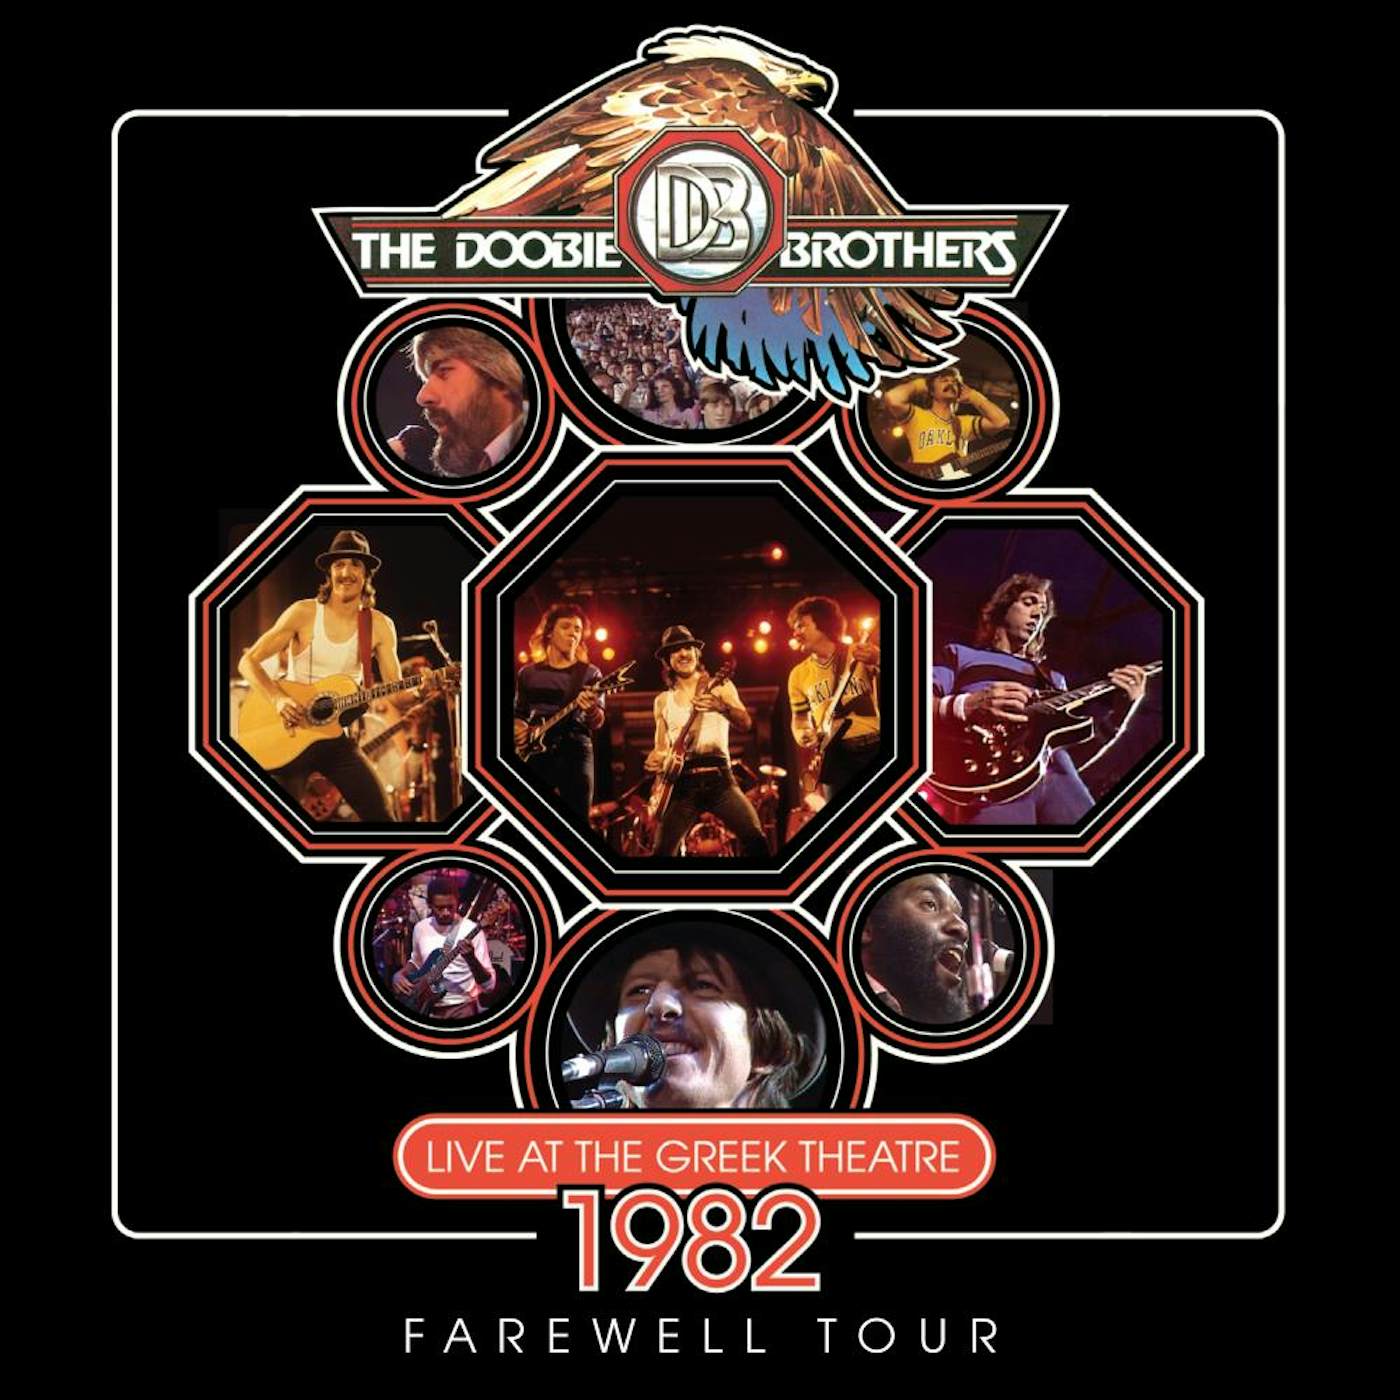 The Doobie Brothers LIVE AT THE GREEK THEATRE 1982 (CD/DVD) CD